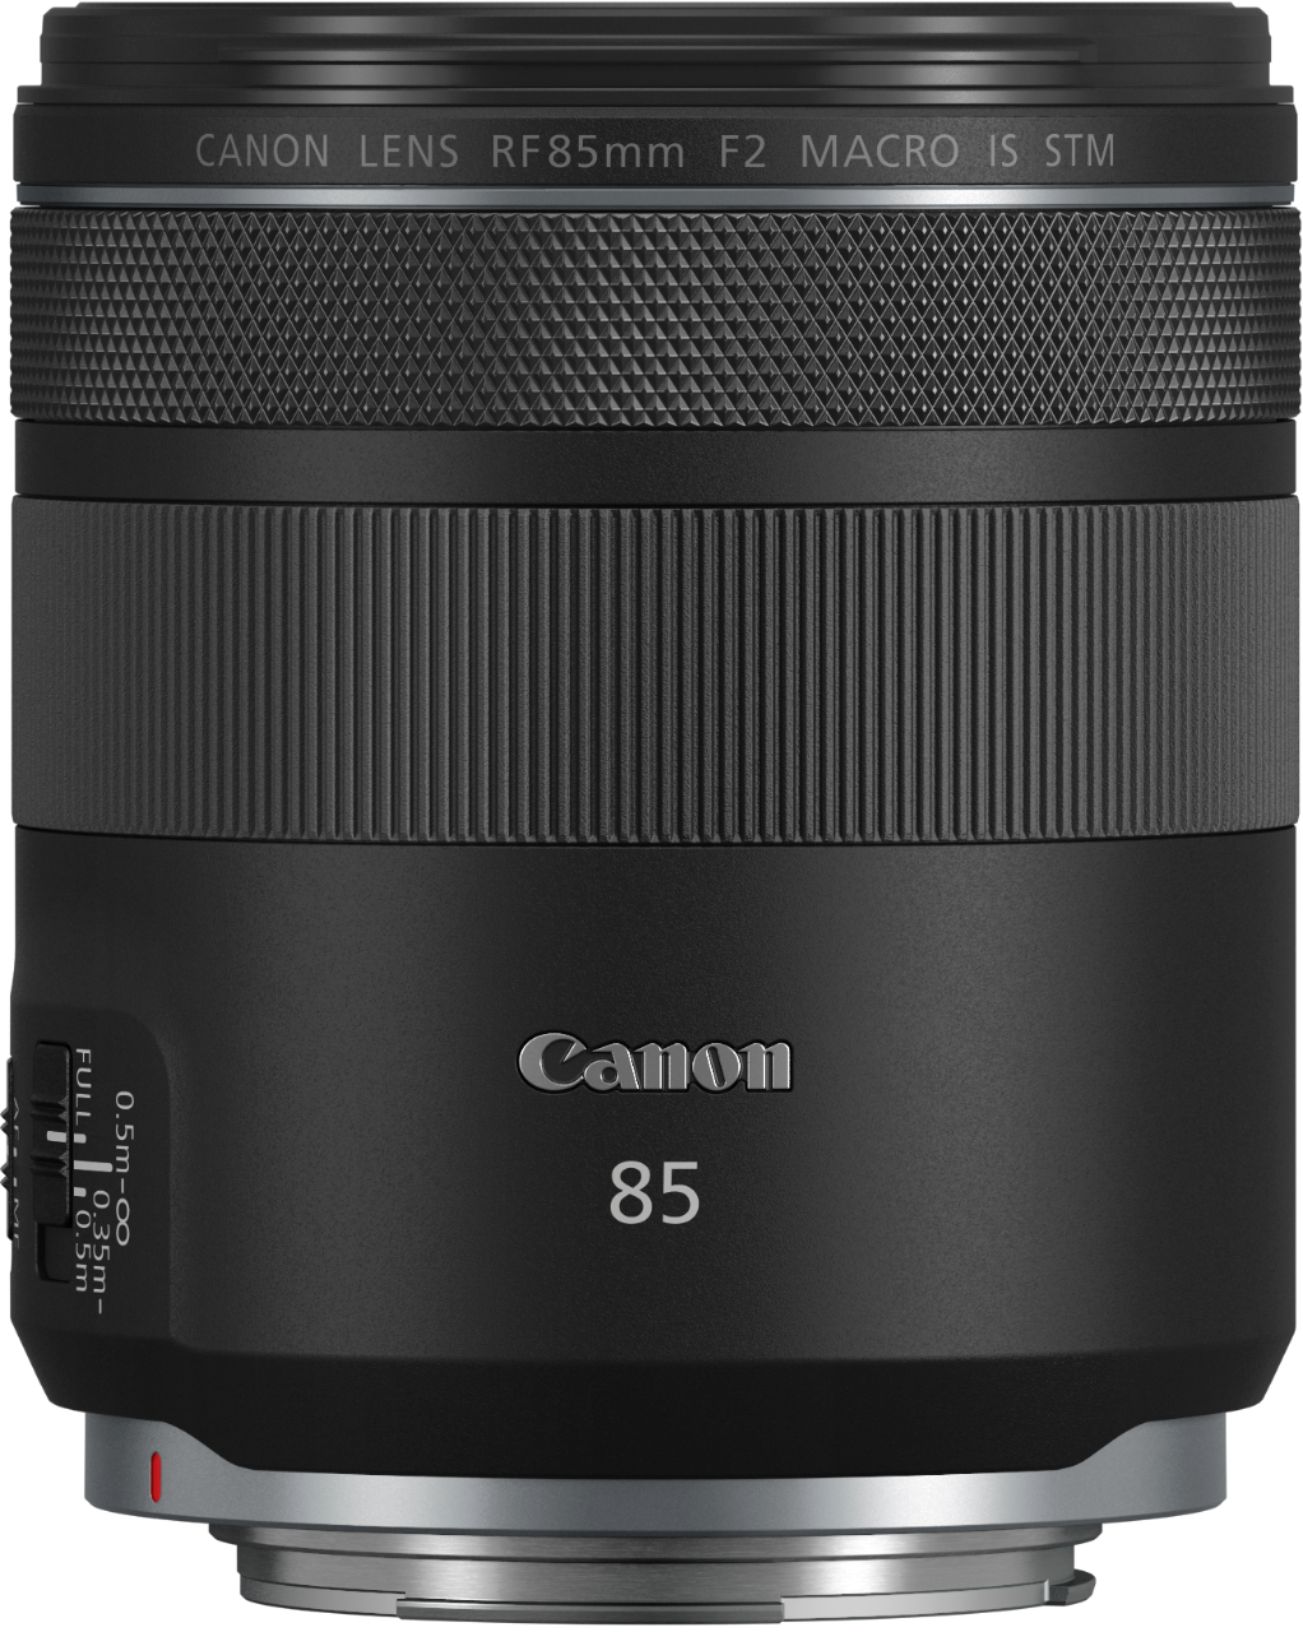 Back View: Canon - RF 70-200mm f/4 L IS USM Telephoto Zoom Lens for RF Mount Cameras - White